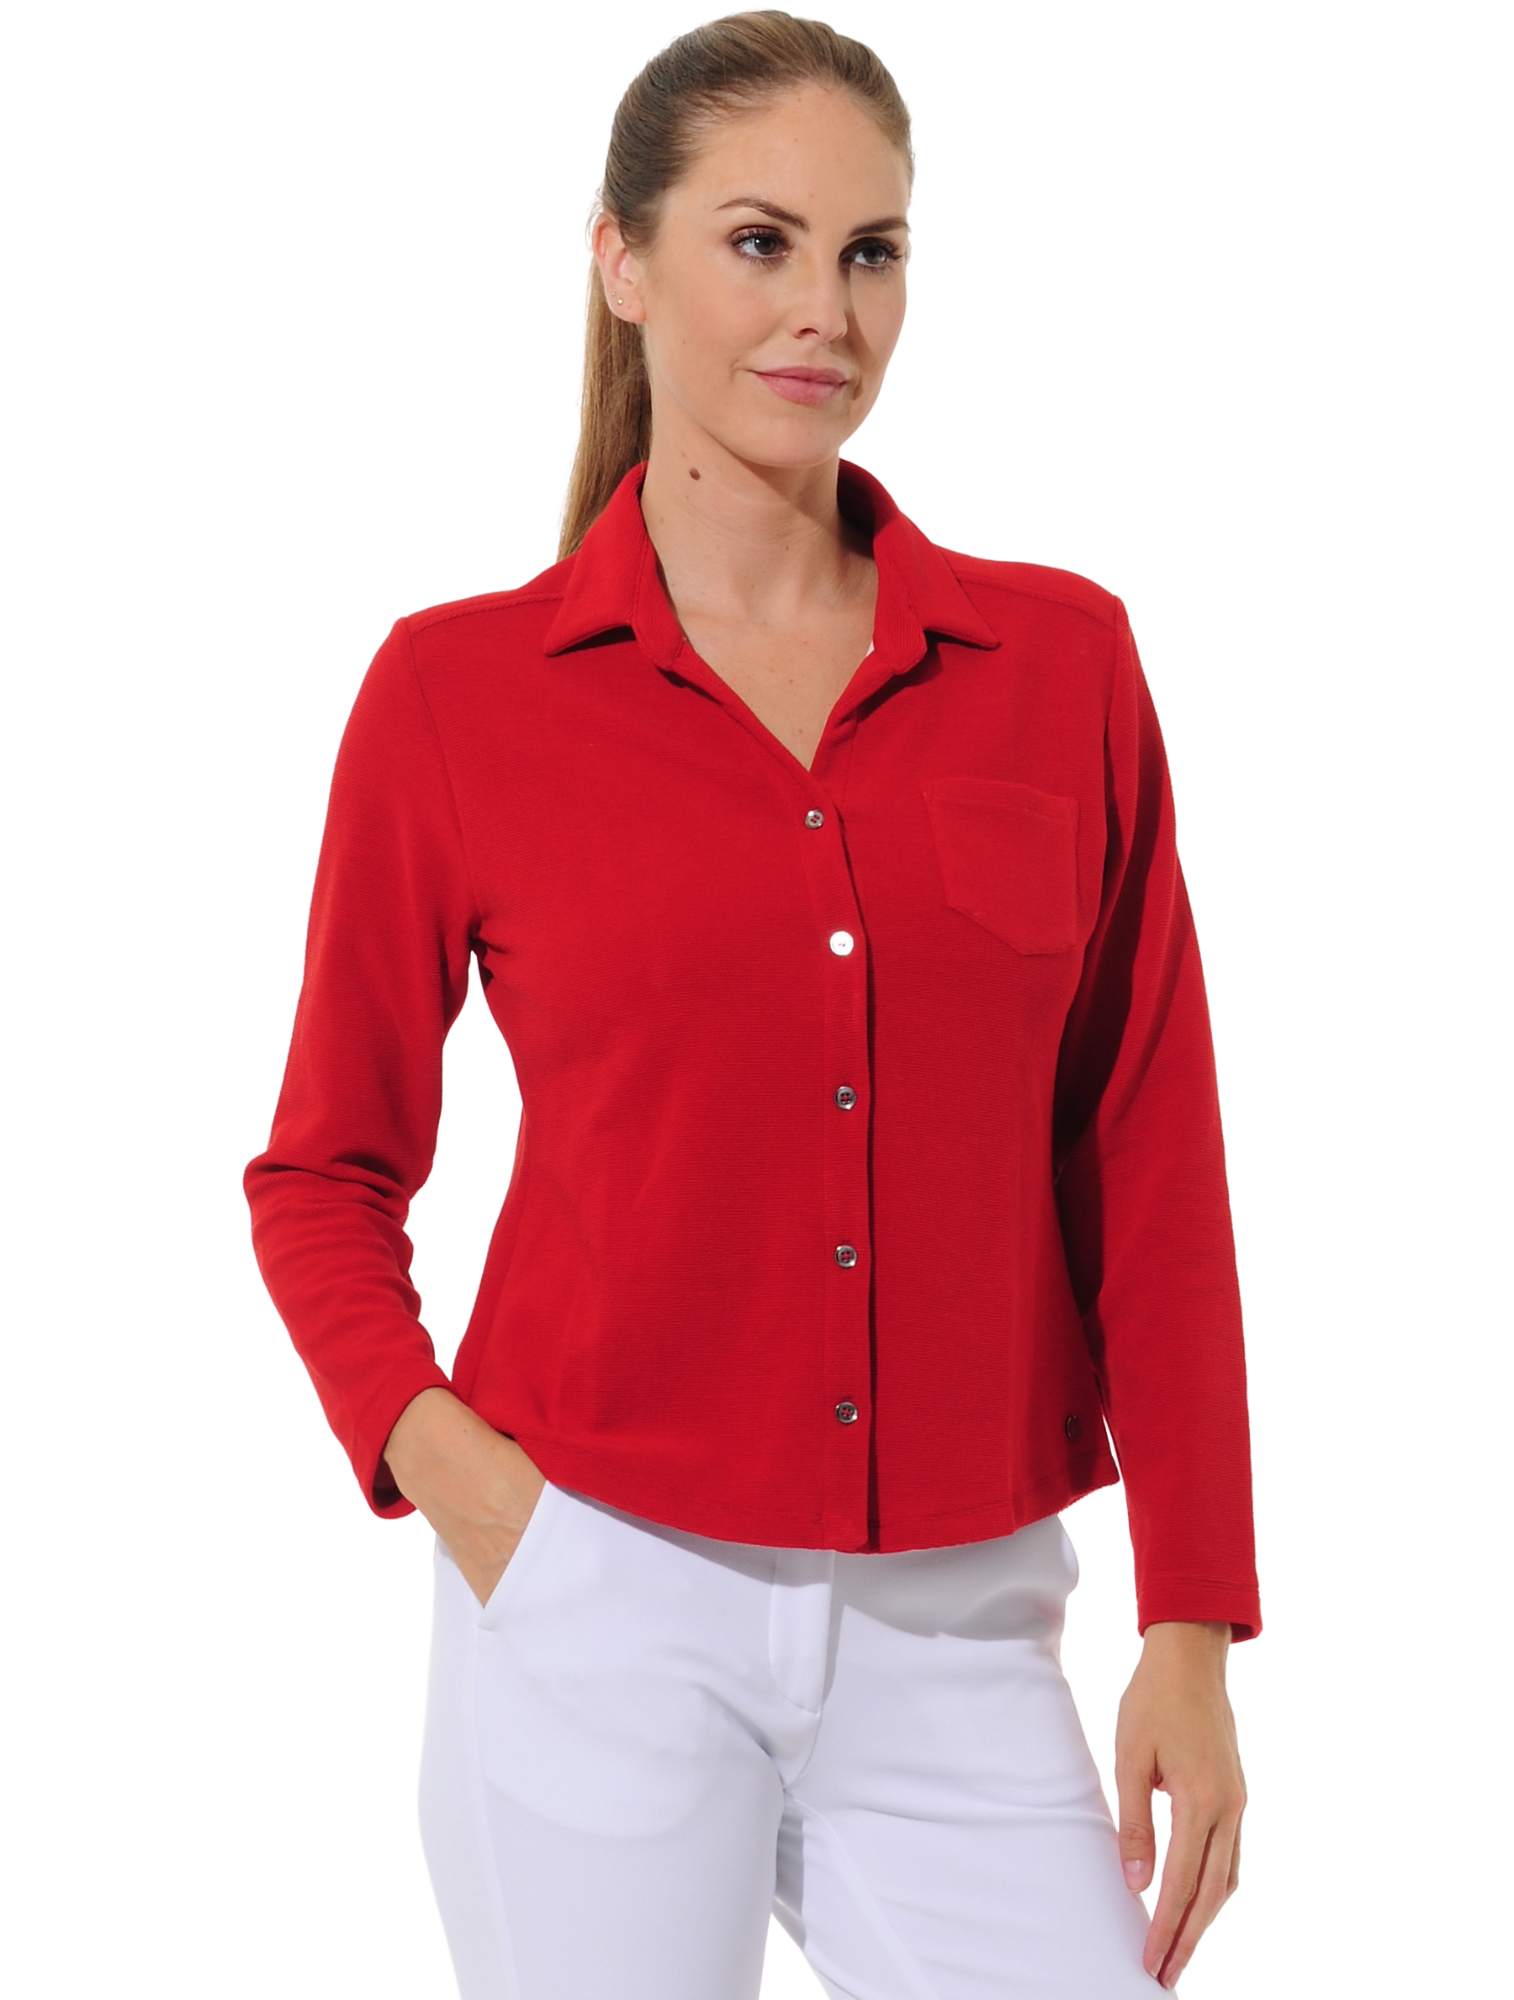 Towelling golf polo shirt red